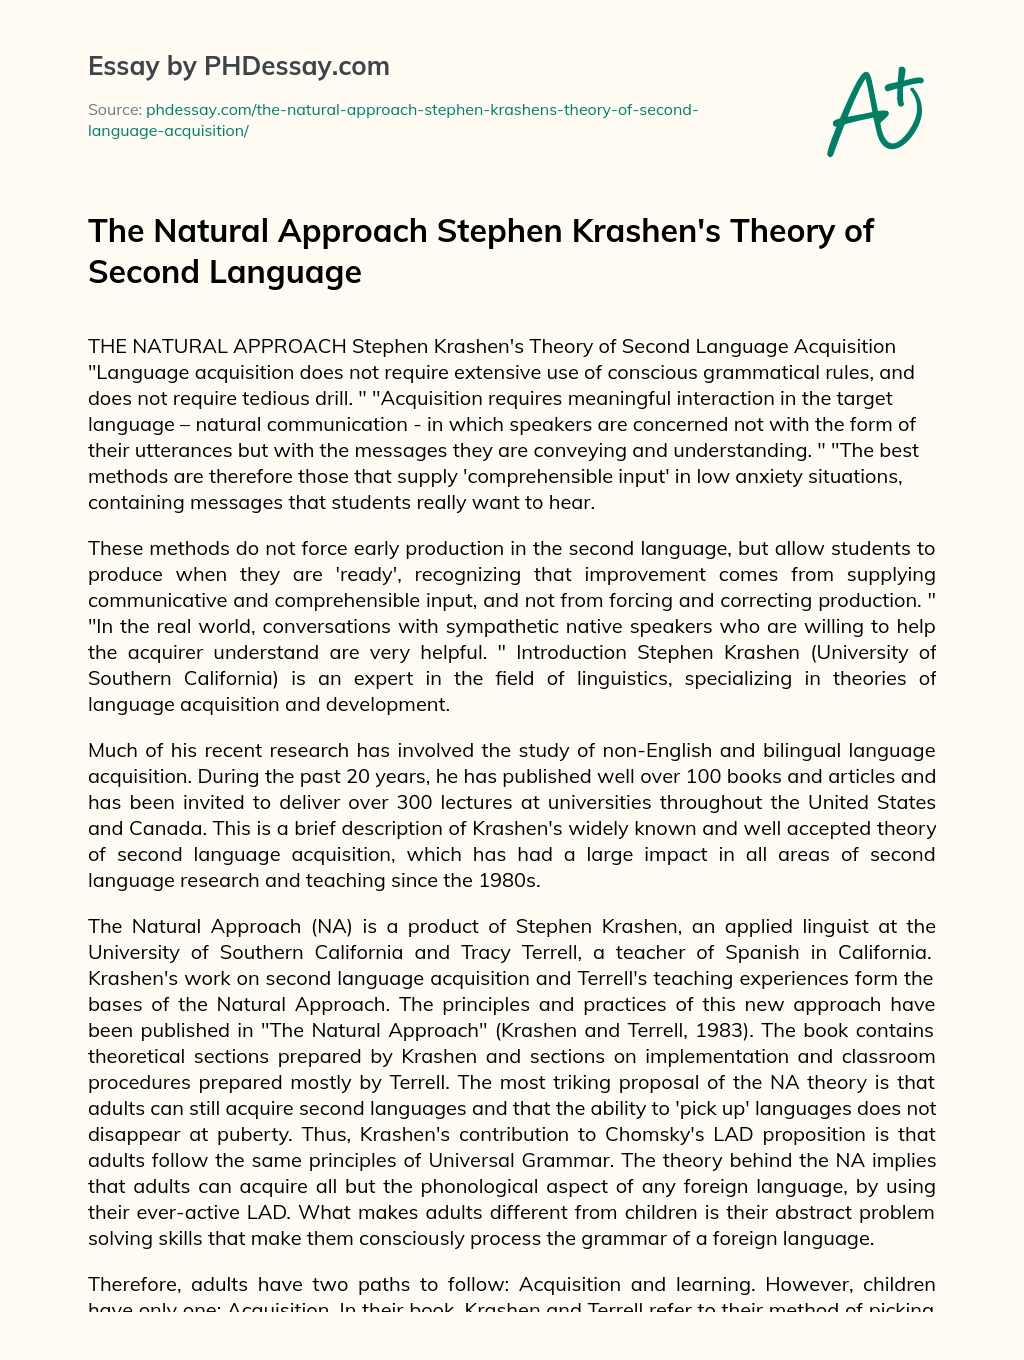 The Natural Approach Stephen Krashen’s Theory of Second Language essay